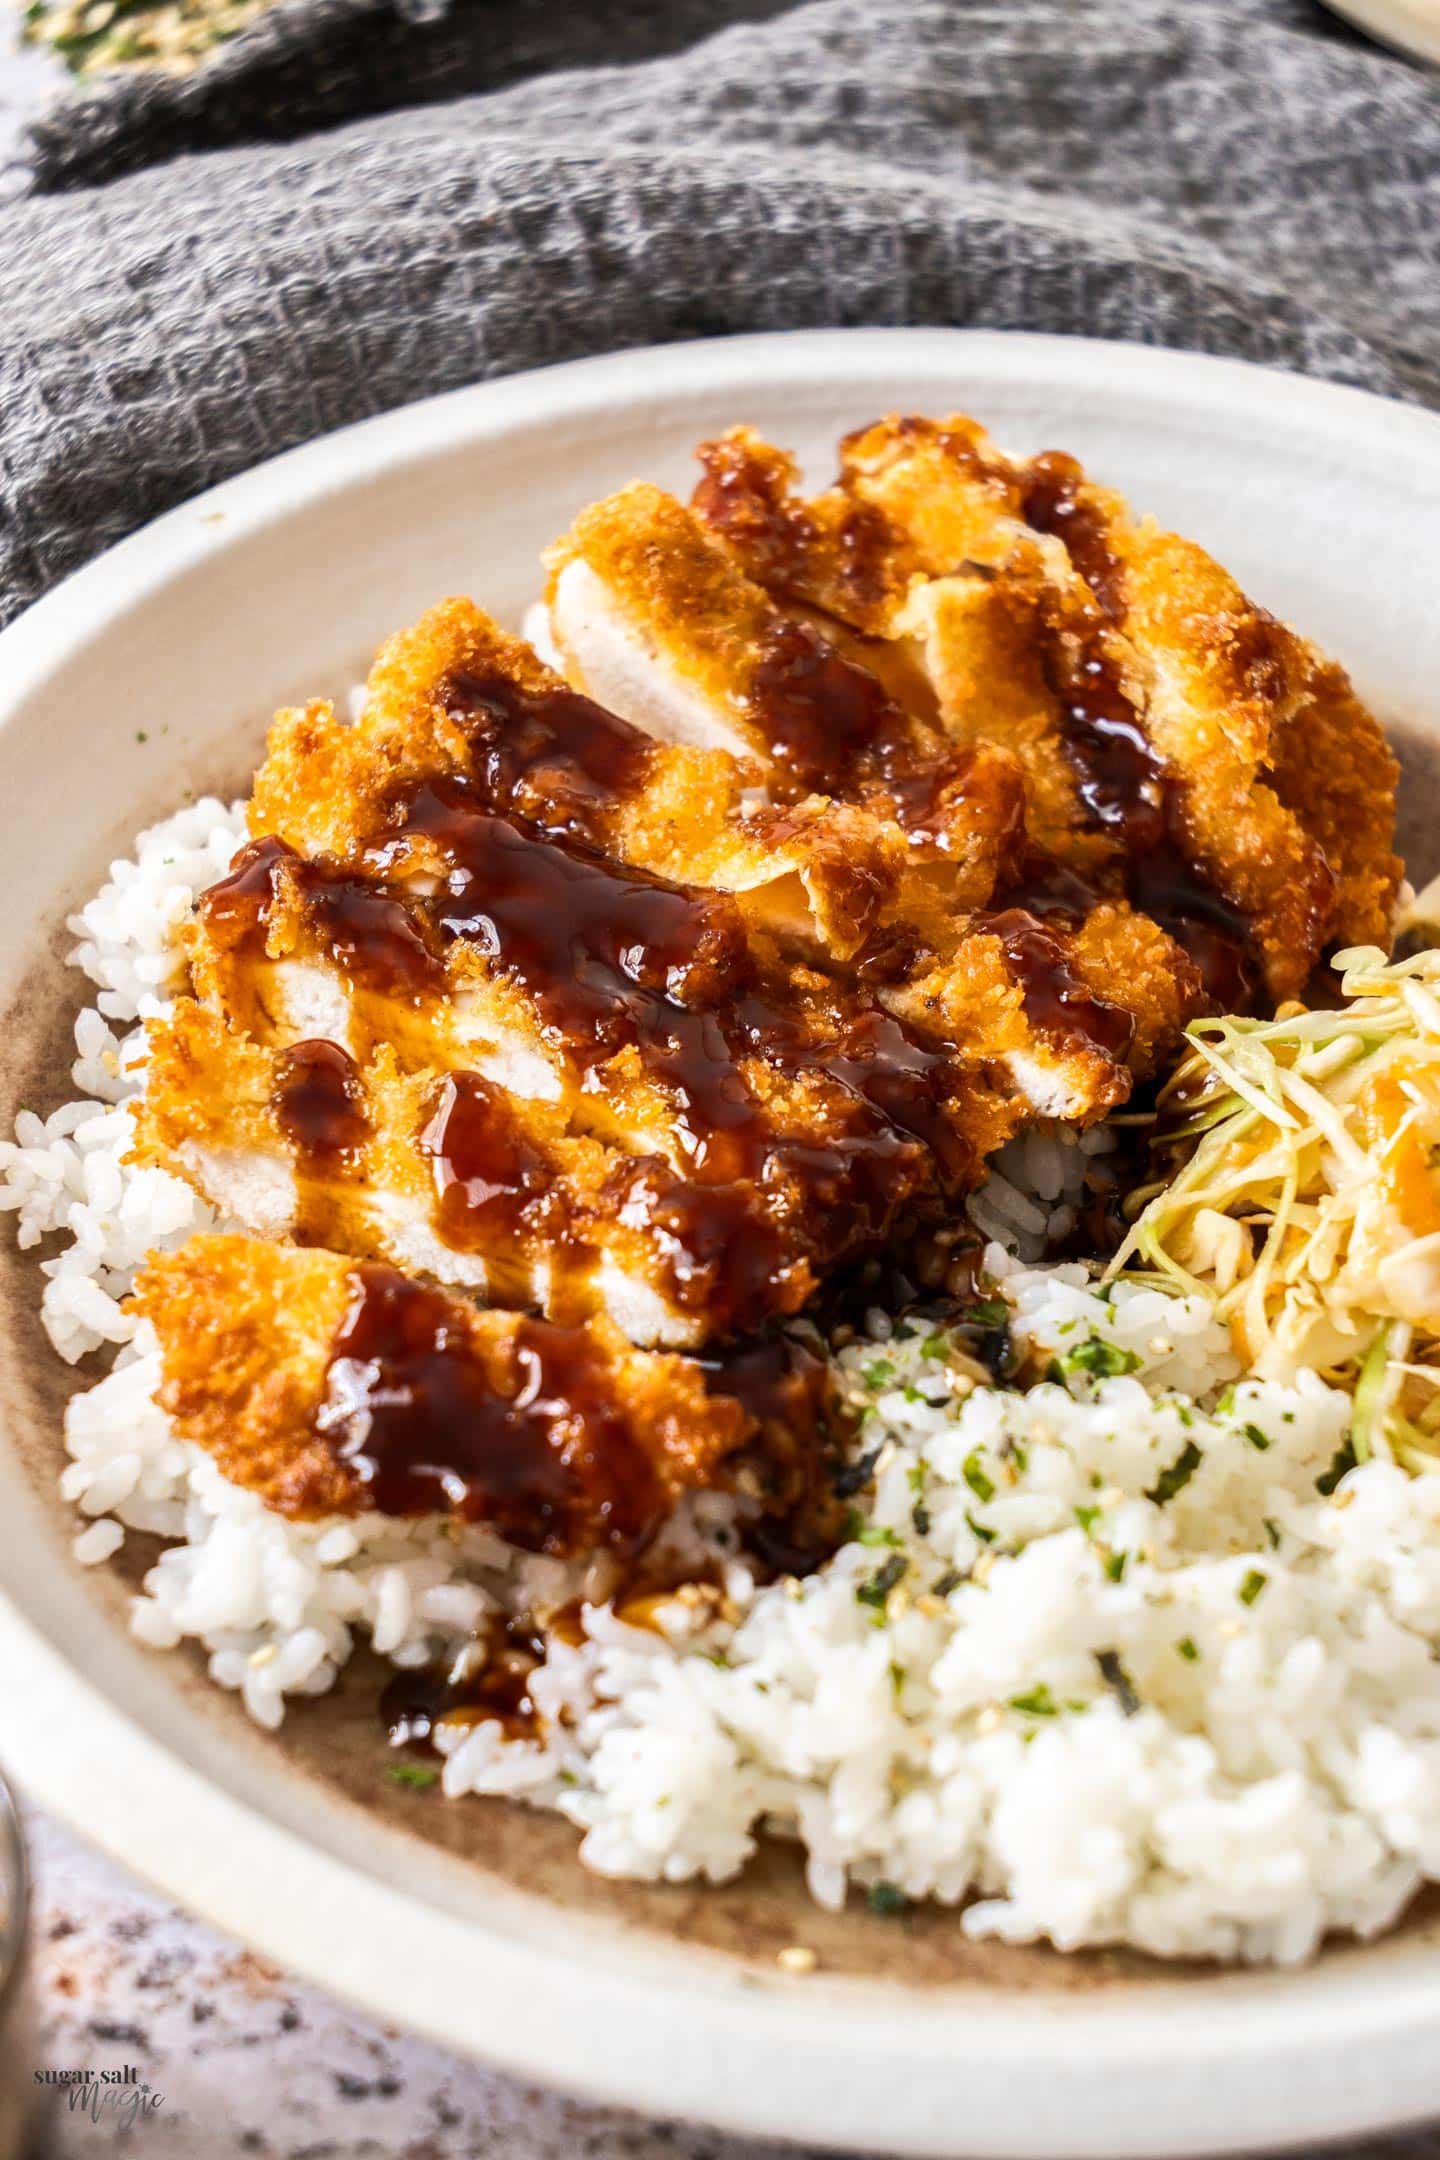 Sliced chicken katsu on a bed of rice and cabbage.